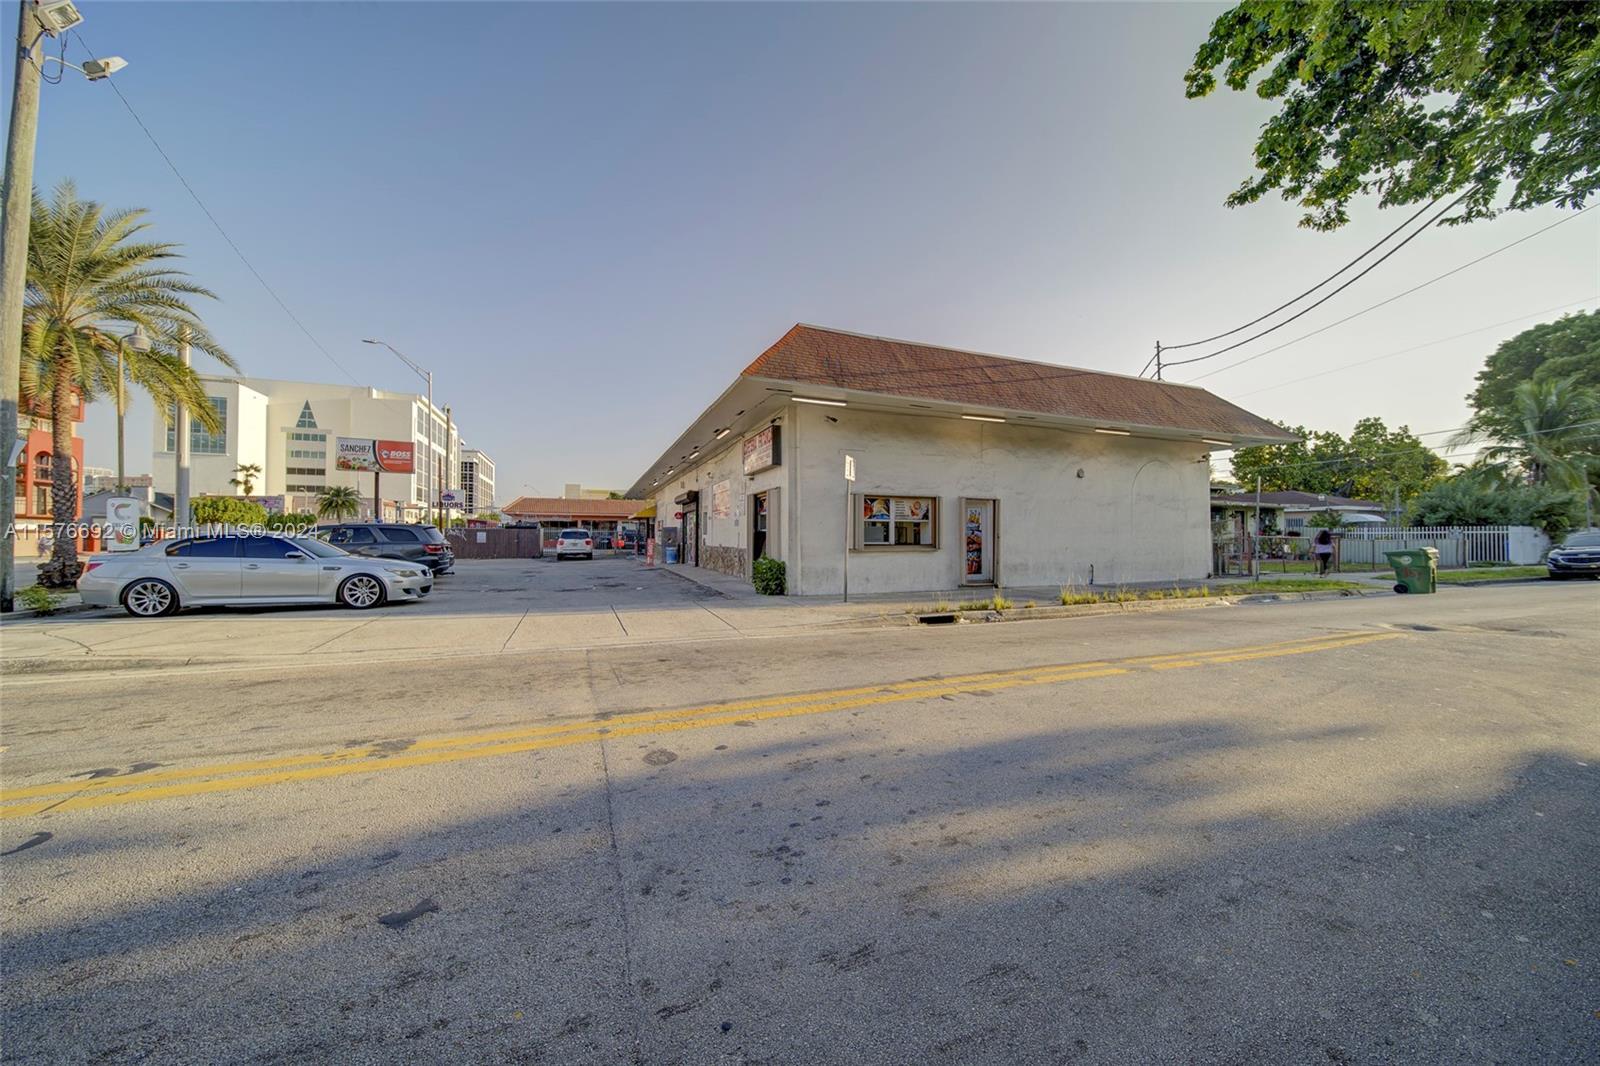 Little Havana cafeteria and market for sale with hood and 1,200-gallon grease trap, all up to code. 